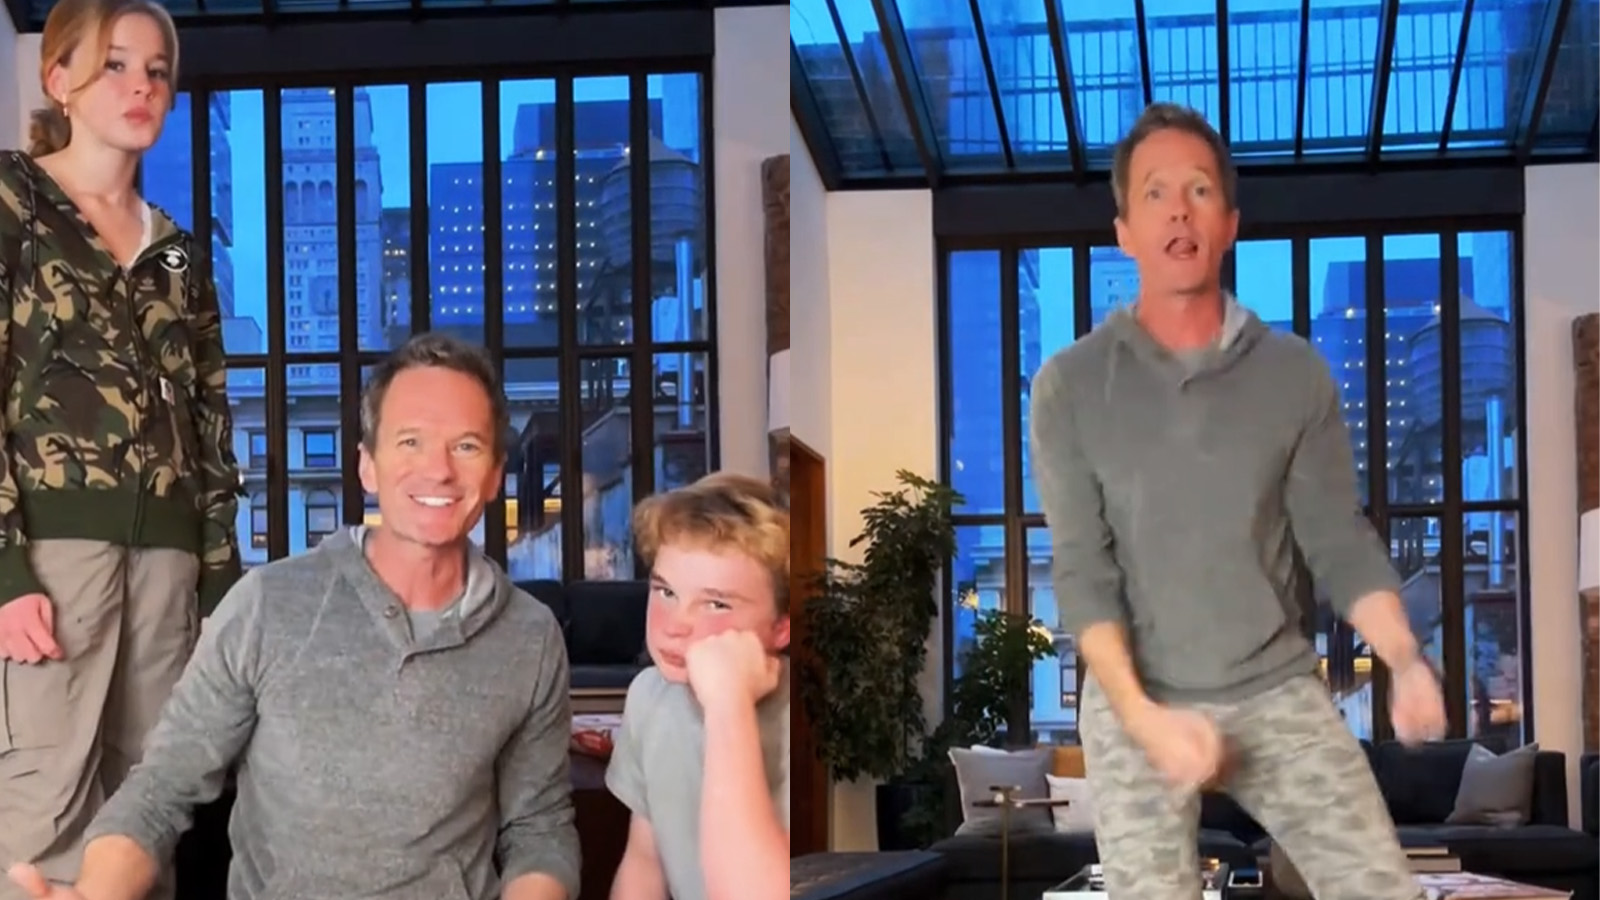 Neil Patrick Harris joins TikTok as “cringy dad” and fans are in love - Dexerto